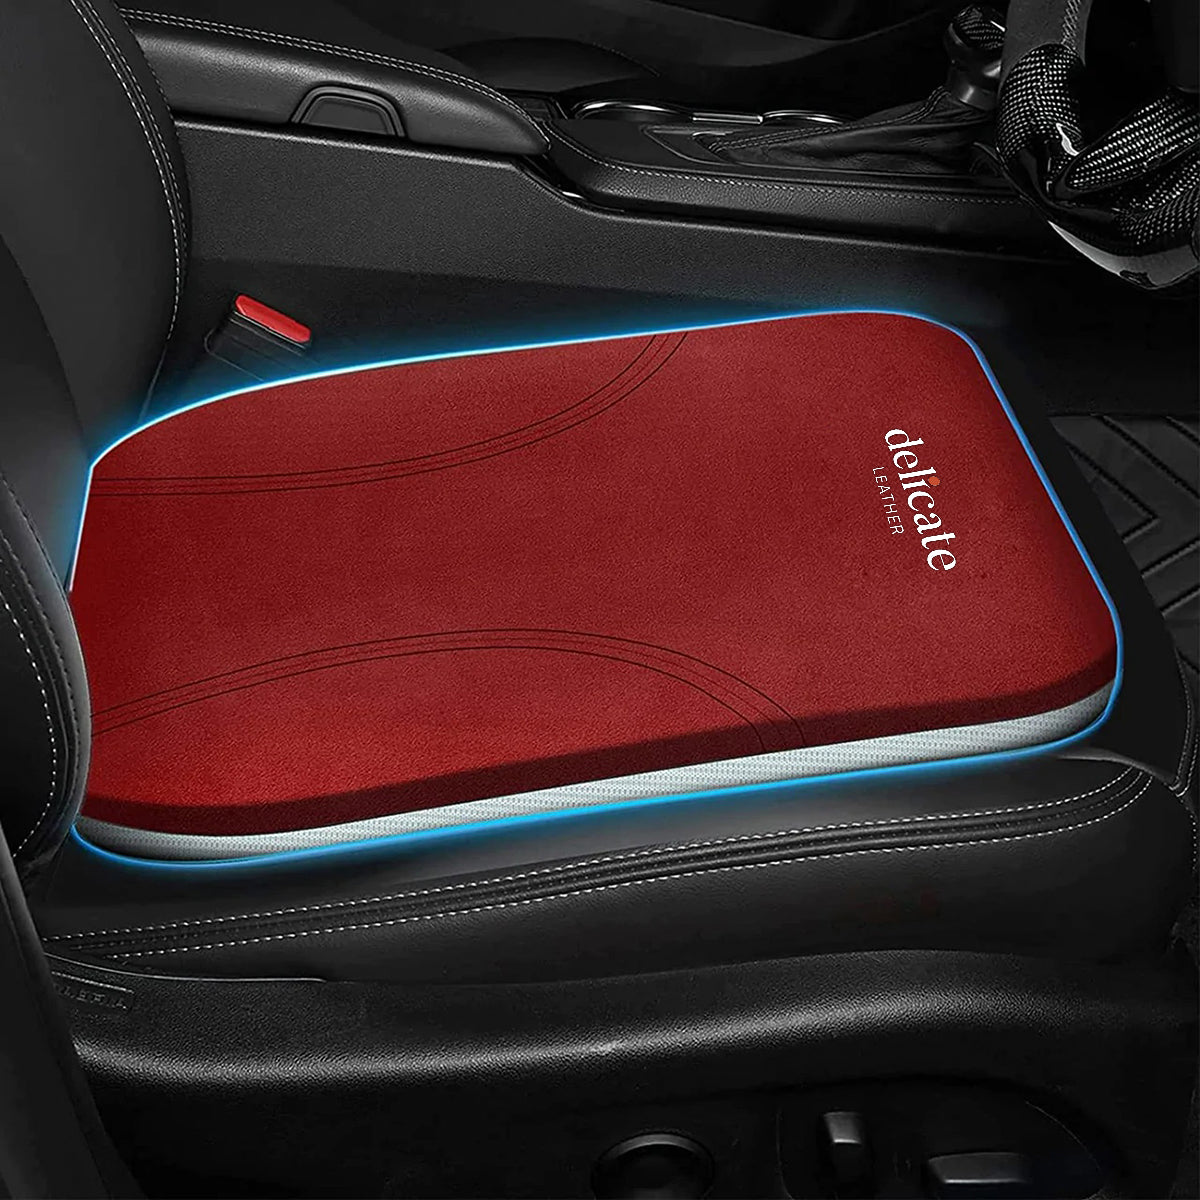 Seat Cushions for Leather Car Seats A Comprehensive Guide